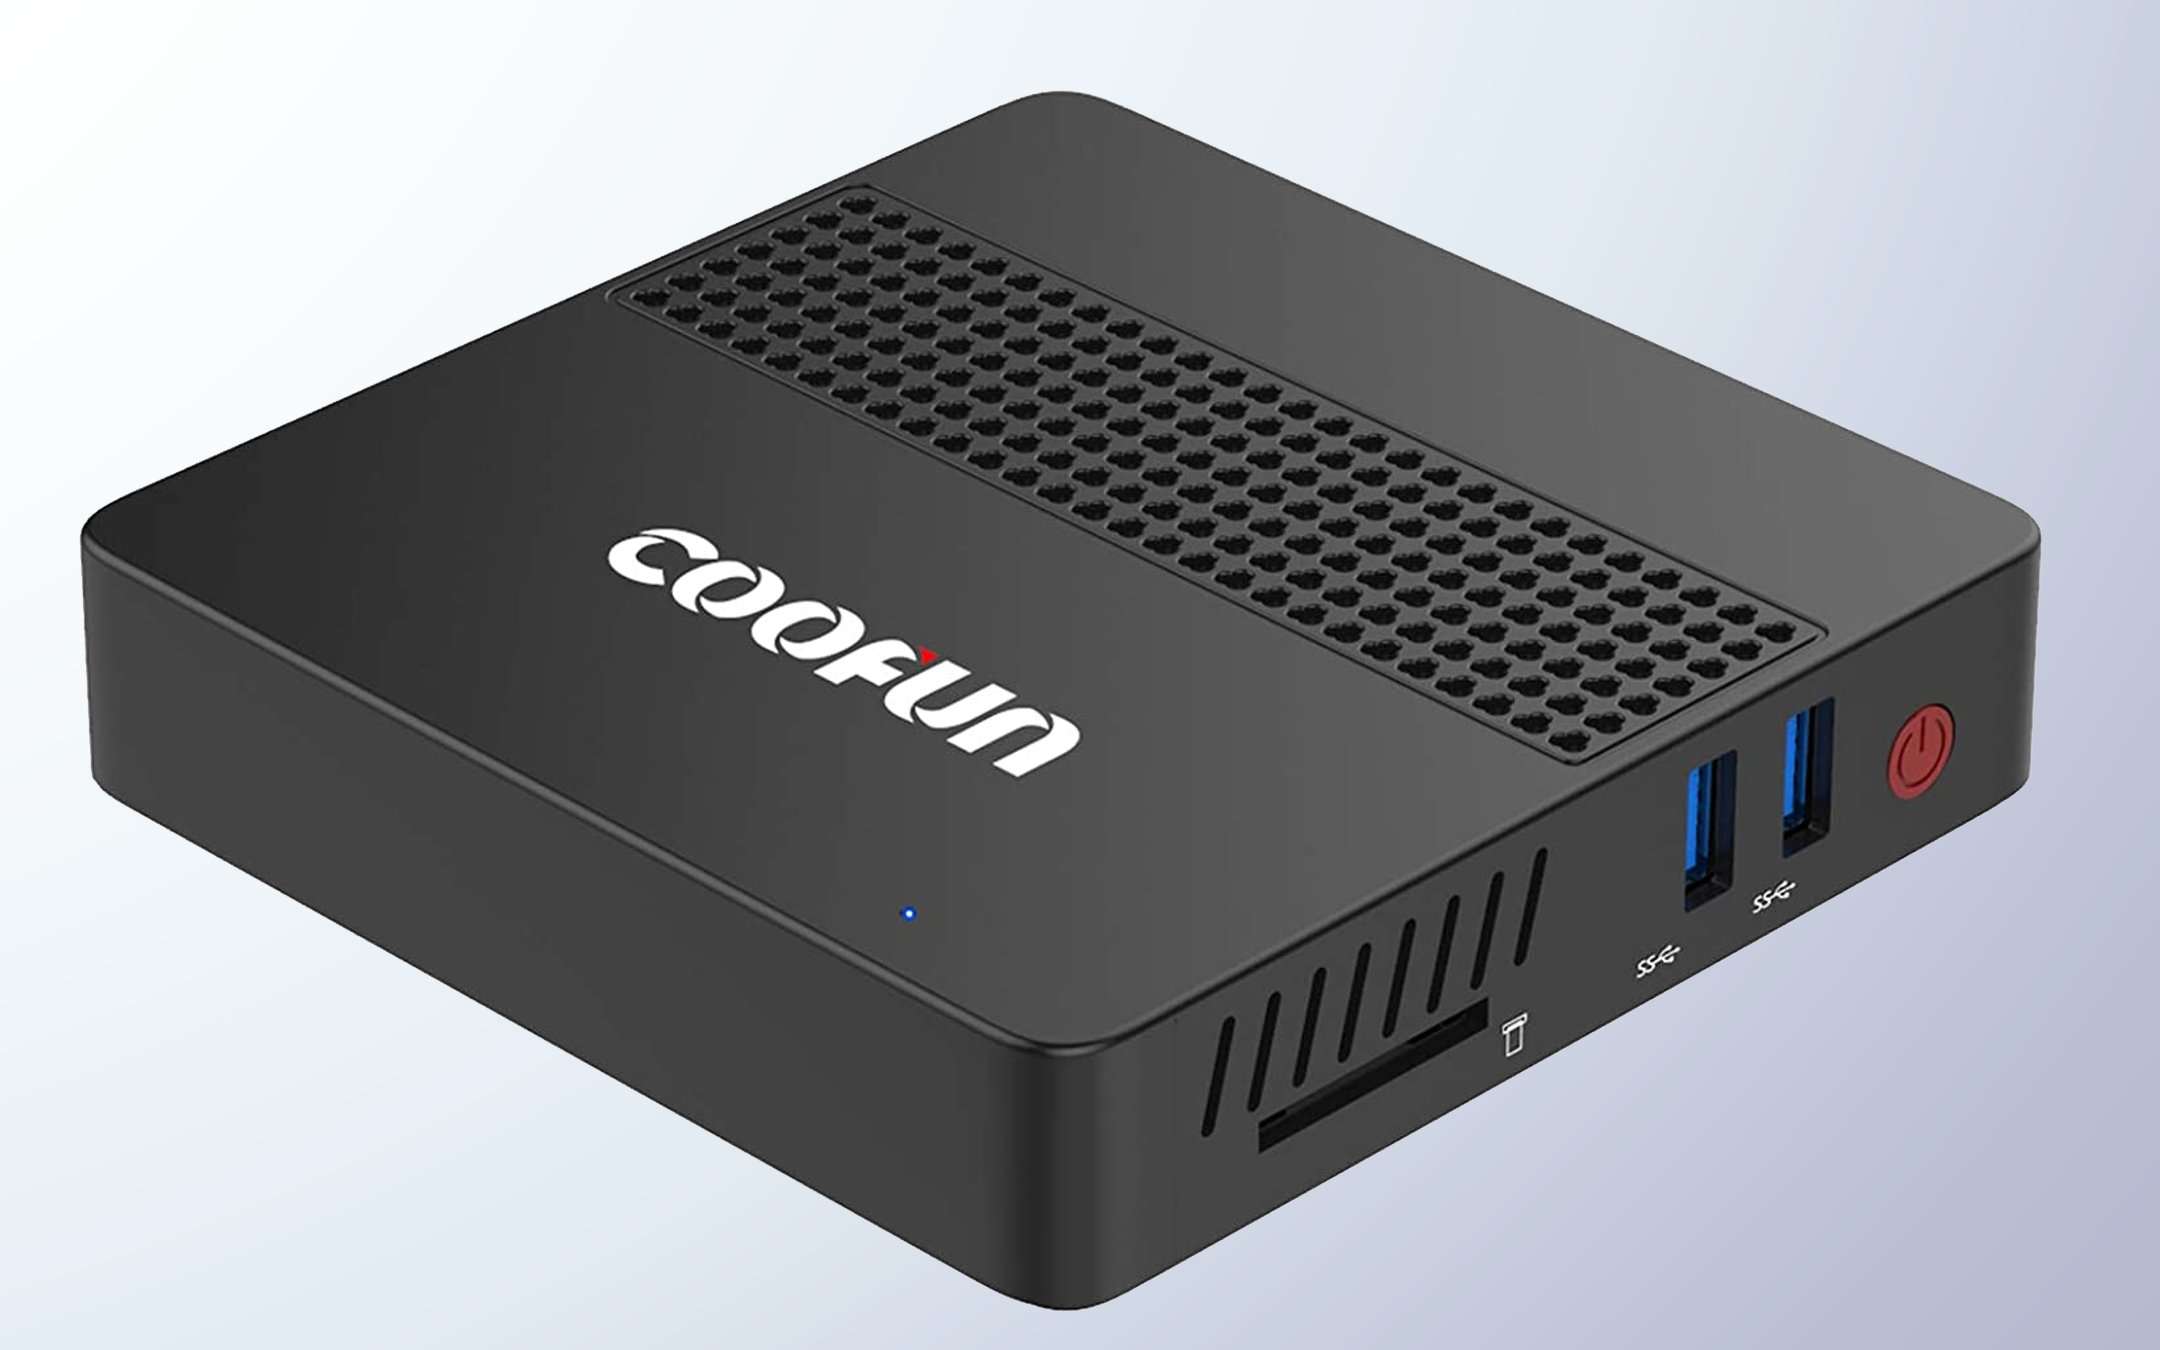 Coofun Mini PC: -15% in today's flash offer